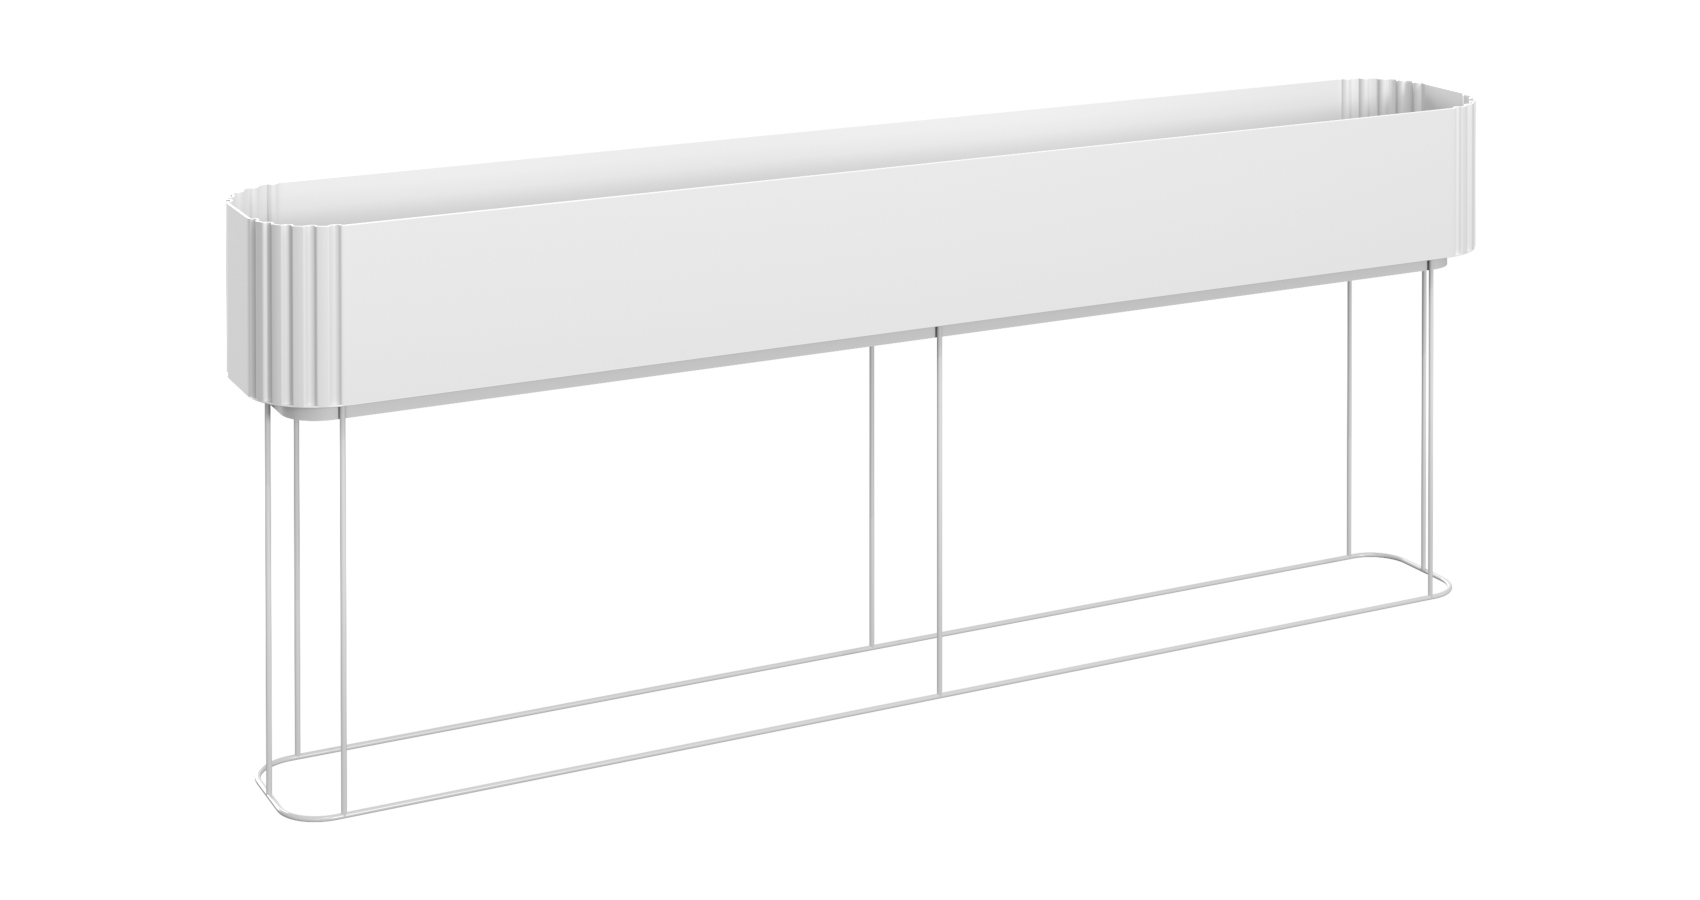 Cubby Planter in white 1500mm wide in front view